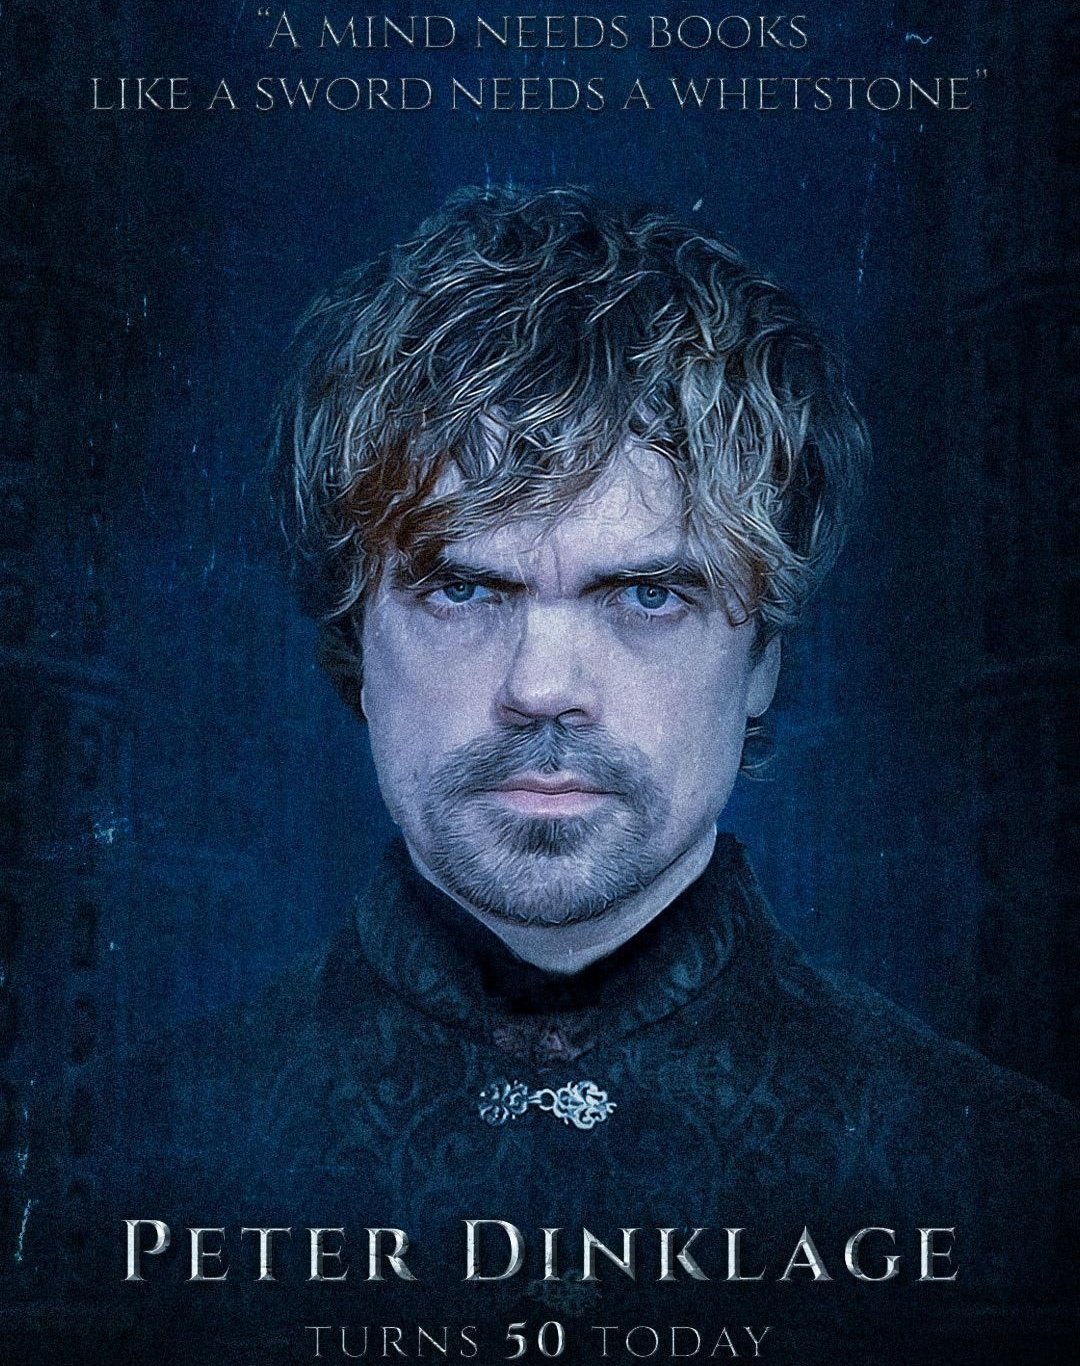 Happy birthday to Peter Dinklage! 
One of the finest actors I\ve ever seen in modern cinema. 